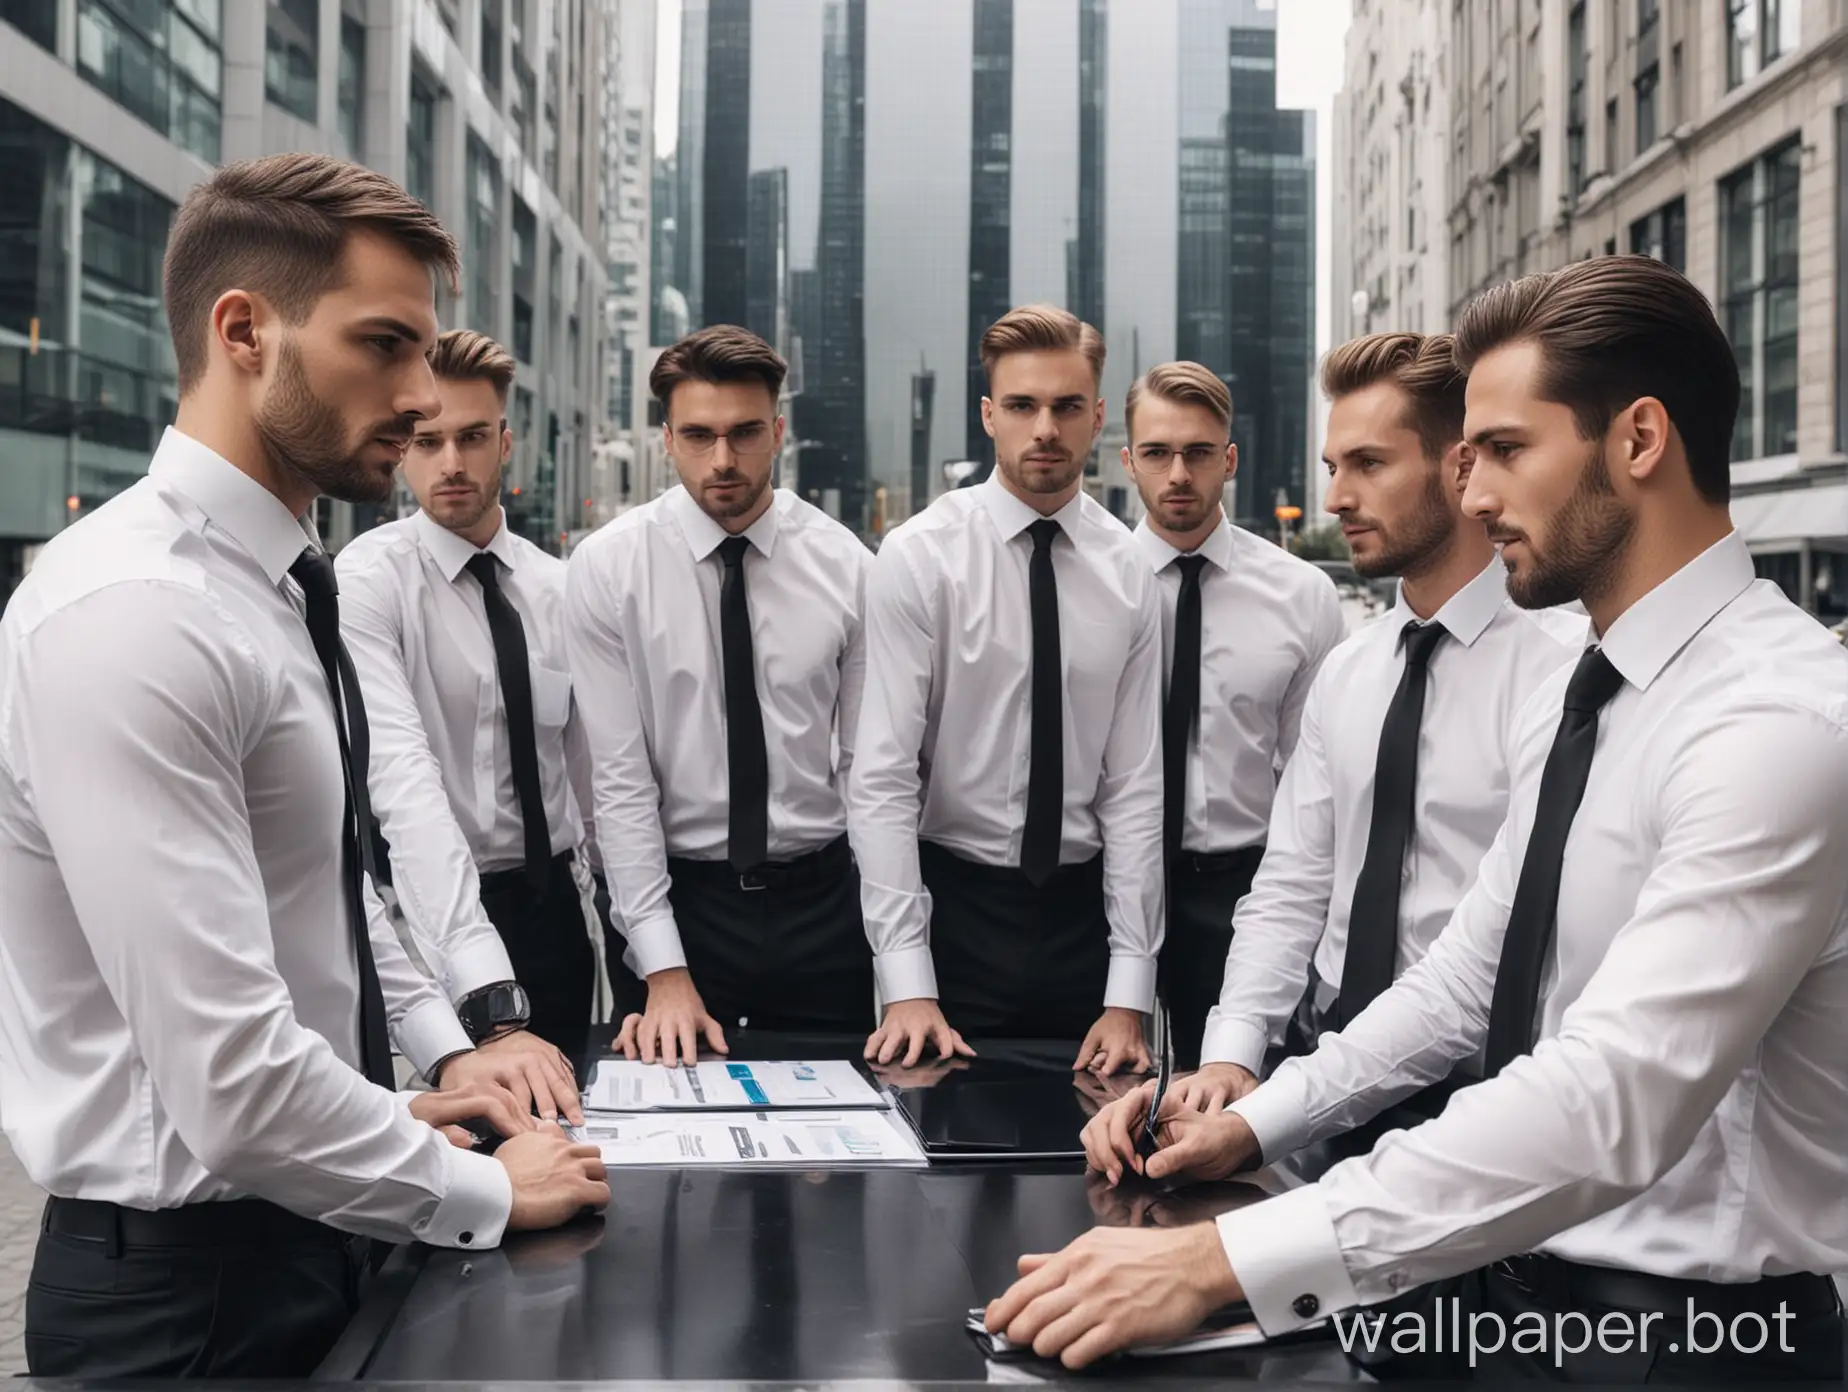 A team in a meeting wearing a white shirt and a black tie, only men, futuristic theme in a city